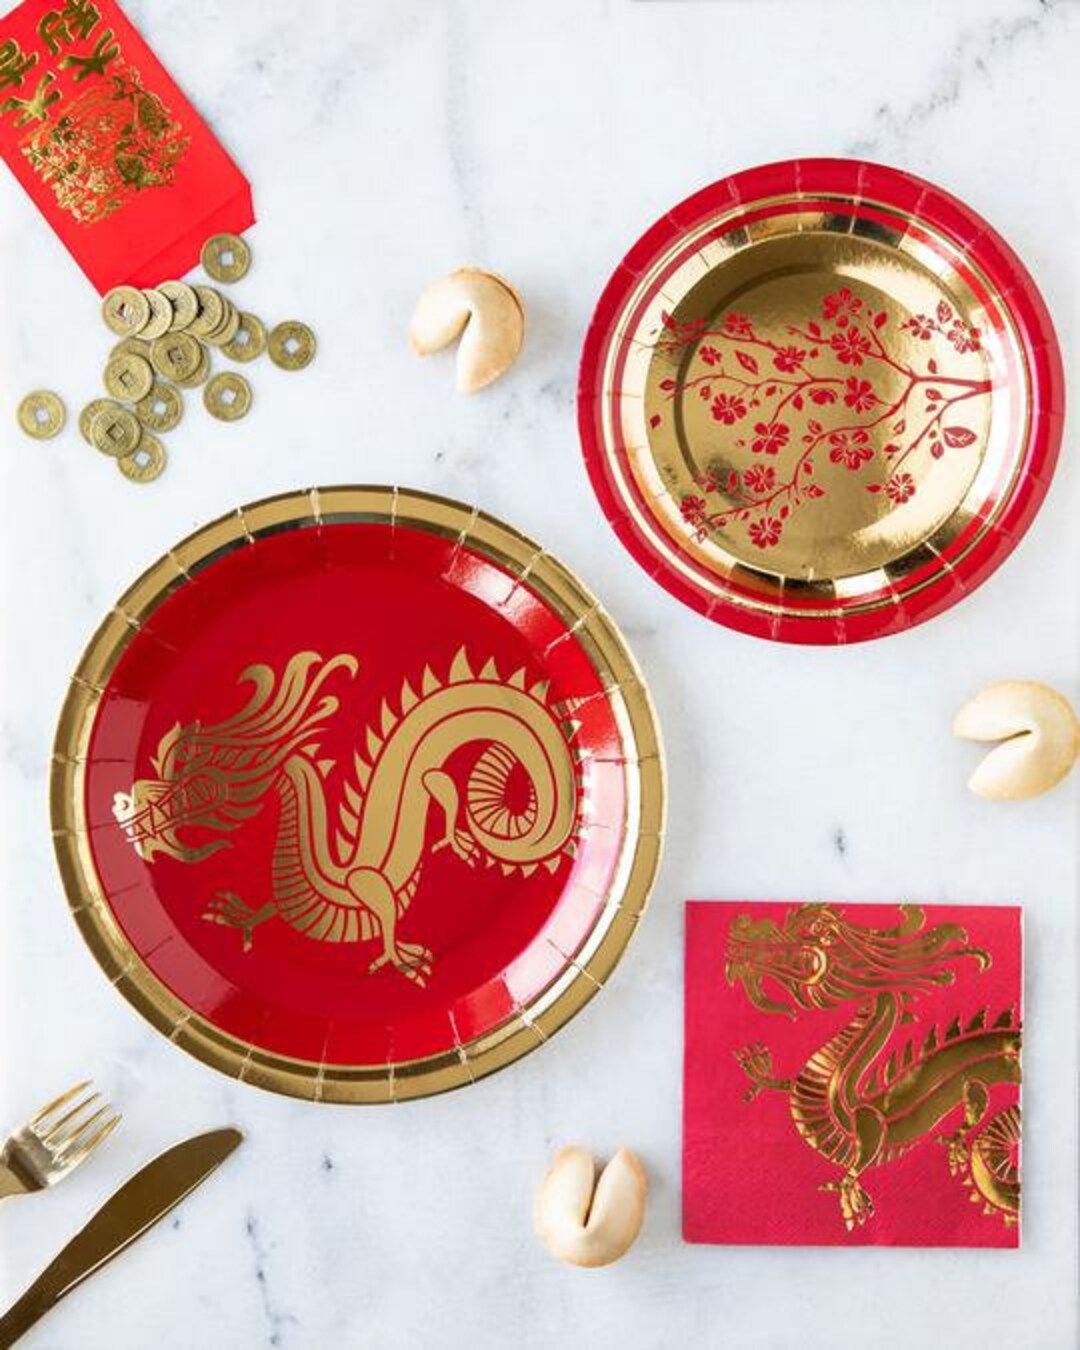 How to Stylishly Decorate With Red and Gold for Chinese New Year